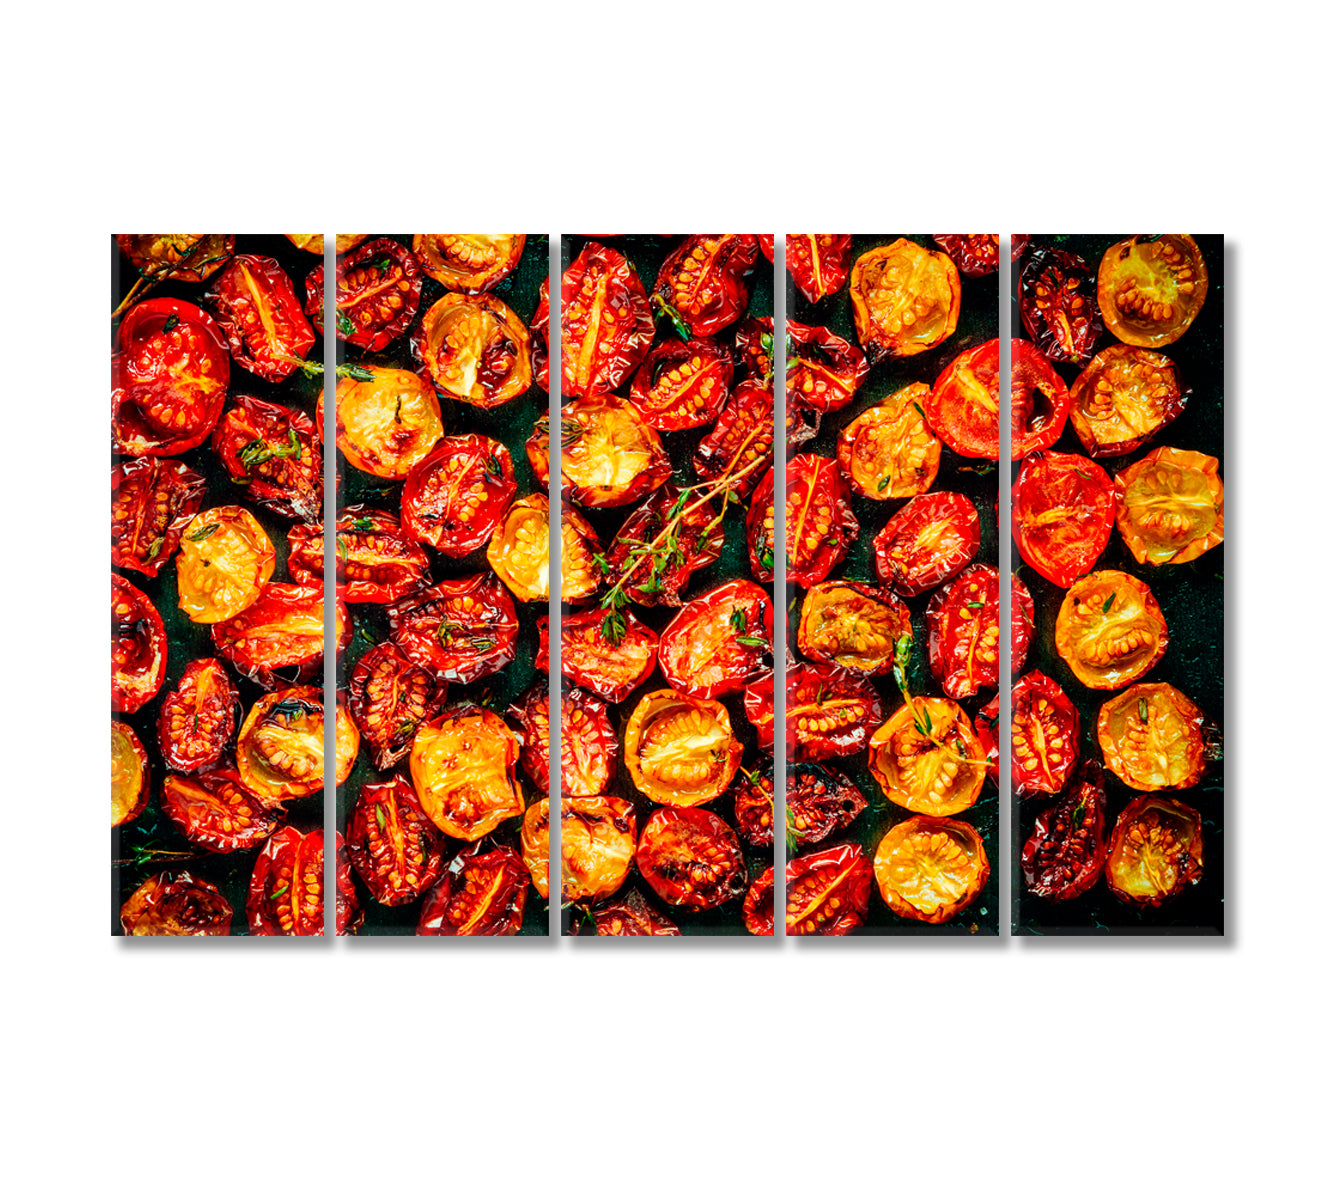 Roasted Red and Yellow Cherry Tomatoes Canvas Print-Canvas Print-CetArt-5 Panels-36x24 inches-CetArt